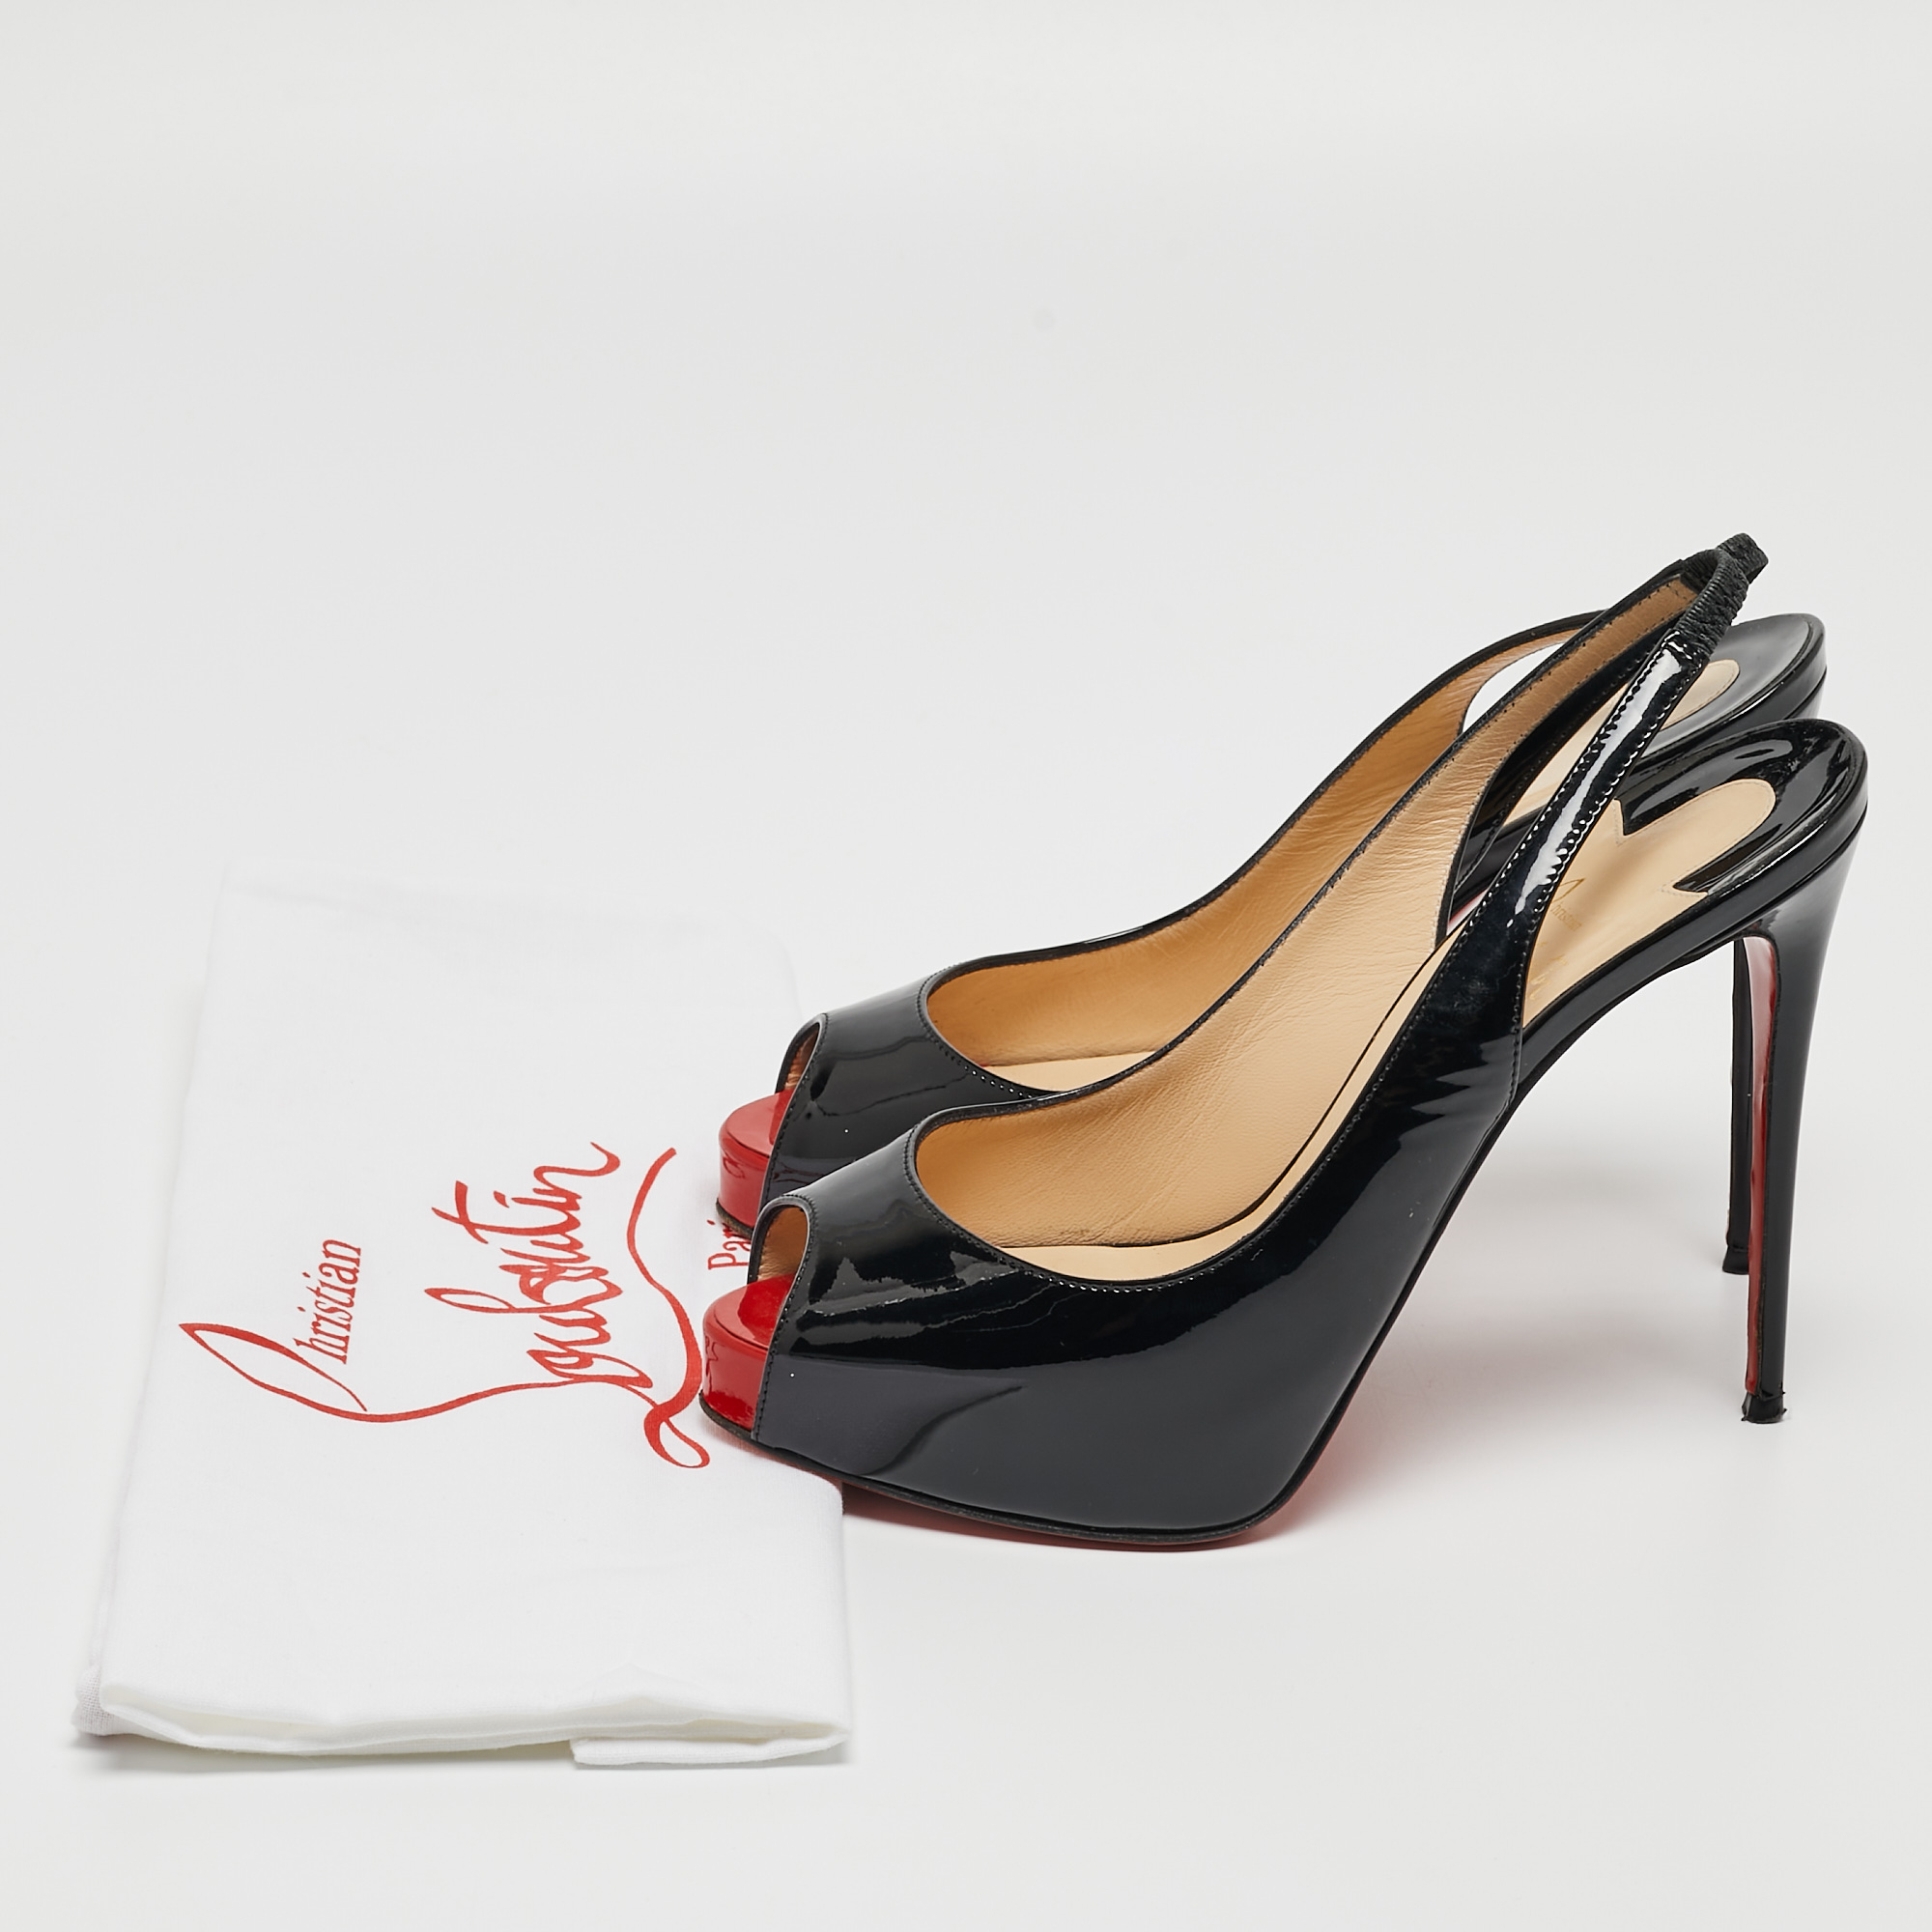 Christian Louboutin Black Patent Private Number Sandals Size 36